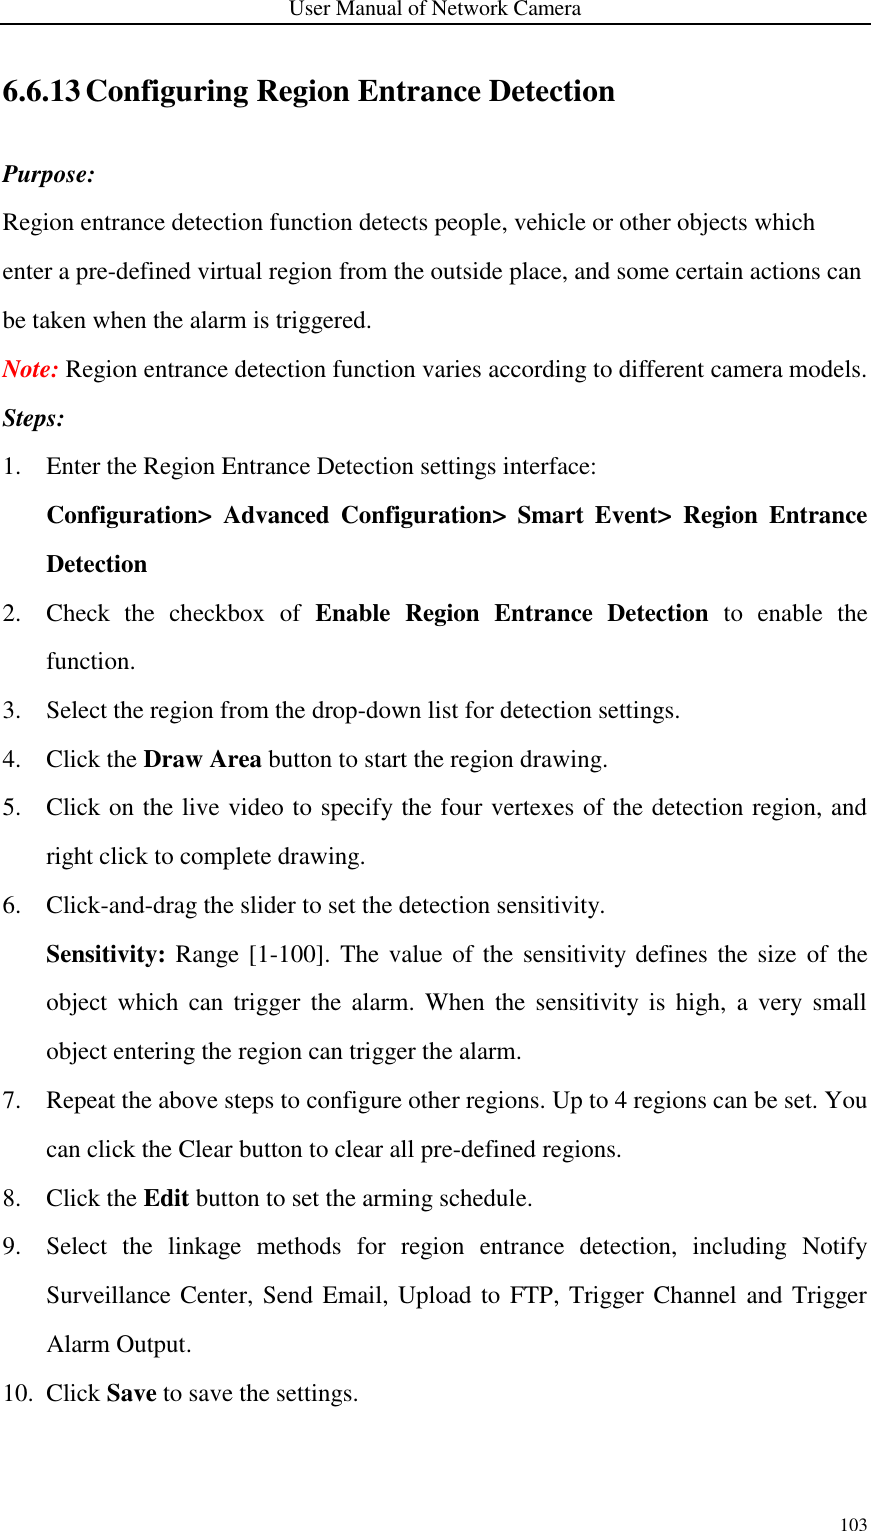 User Manual of Network Camera 103  6.6.13 Configuring Region Entrance Detection Purpose: Region entrance detection function detects people, vehicle or other objects which enter a pre-defined virtual region from the outside place, and some certain actions can be taken when the alarm is triggered. Note: Region entrance detection function varies according to different camera models. Steps: 1. Enter the Region Entrance Detection settings interface:   Configuration&gt;  Advanced  Configuration&gt;  Smart  Event&gt;  Region  Entrance Detection 2. Check  the  checkbox  of  Enable  Region  Entrance  Detection  to  enable  the function. 3. Select the region from the drop-down list for detection settings. 4. Click the Draw Area button to start the region drawing. 5. Click on the live video to specify the four vertexes of the detection region, and right click to complete drawing. 6. Click-and-drag the slider to set the detection sensitivity. Sensitivity: Range  [1-100]. The value of the  sensitivity  defines the size  of the object  which  can trigger  the  alarm.  When  the  sensitivity  is  high,  a very  small object entering the region can trigger the alarm. 7. Repeat the above steps to configure other regions. Up to 4 regions can be set. You can click the Clear button to clear all pre-defined regions. 8. Click the Edit button to set the arming schedule. 9. Select  the  linkage  methods  for  region  entrance  detection,  including  Notify Surveillance Center, Send Email, Upload to FTP, Trigger Channel and Trigger Alarm Output. 10. Click Save to save the settings. 